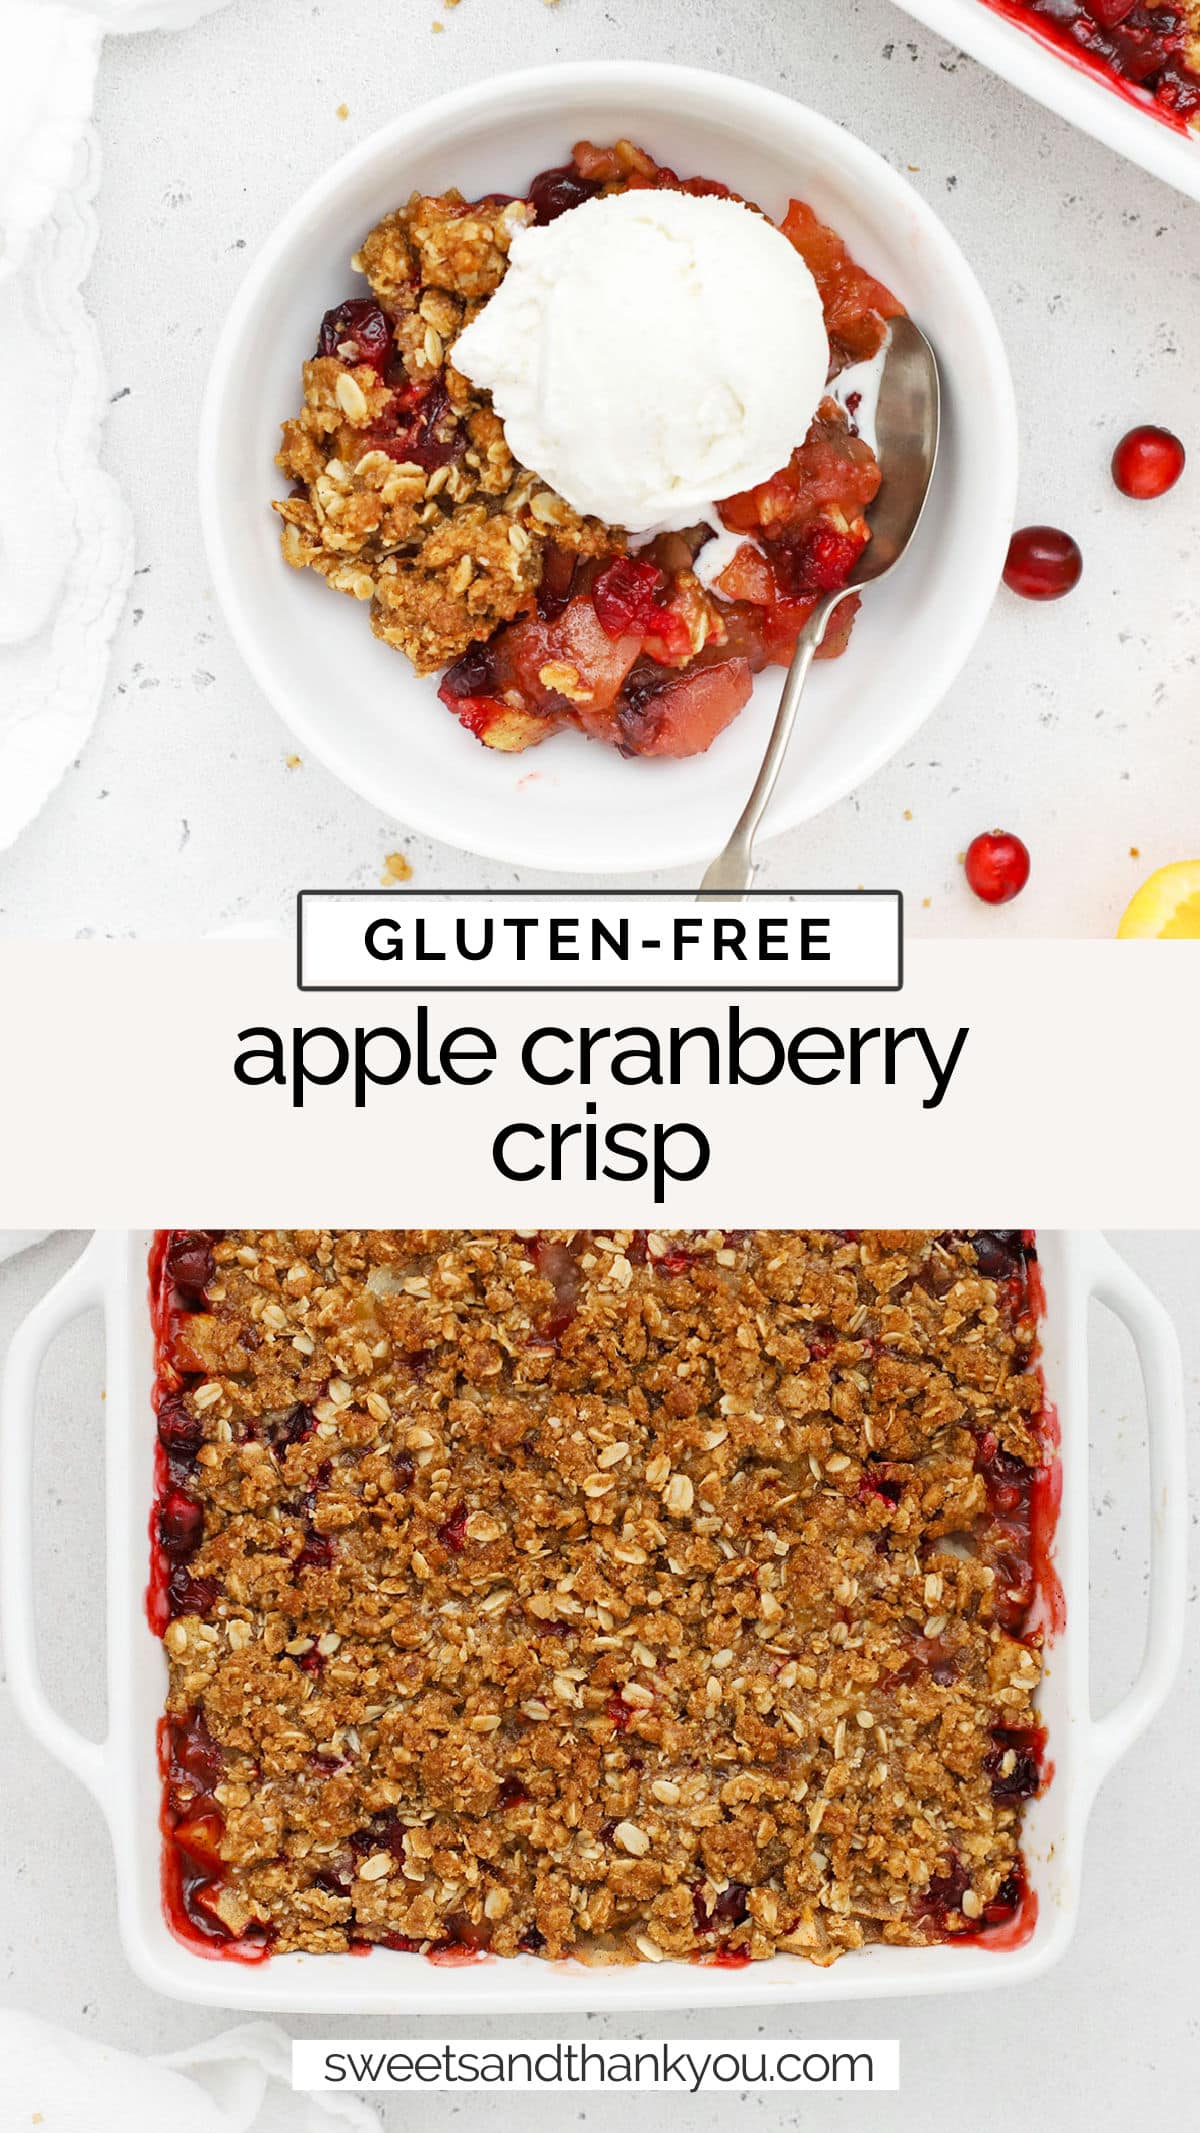 This easy Gluten-Free Apple Cranberry Crisp recipe is the perfect dessert for the holiday season. / gluten-free cranberry crisp recipe / gluten-free cranberry crumble recipe / gluten-free thanksgiving dessert / gluten-free christmas dessert / gluten-free cranberry dessert / gluten-free cranberry apple crisp / gluten free cranberry recipe